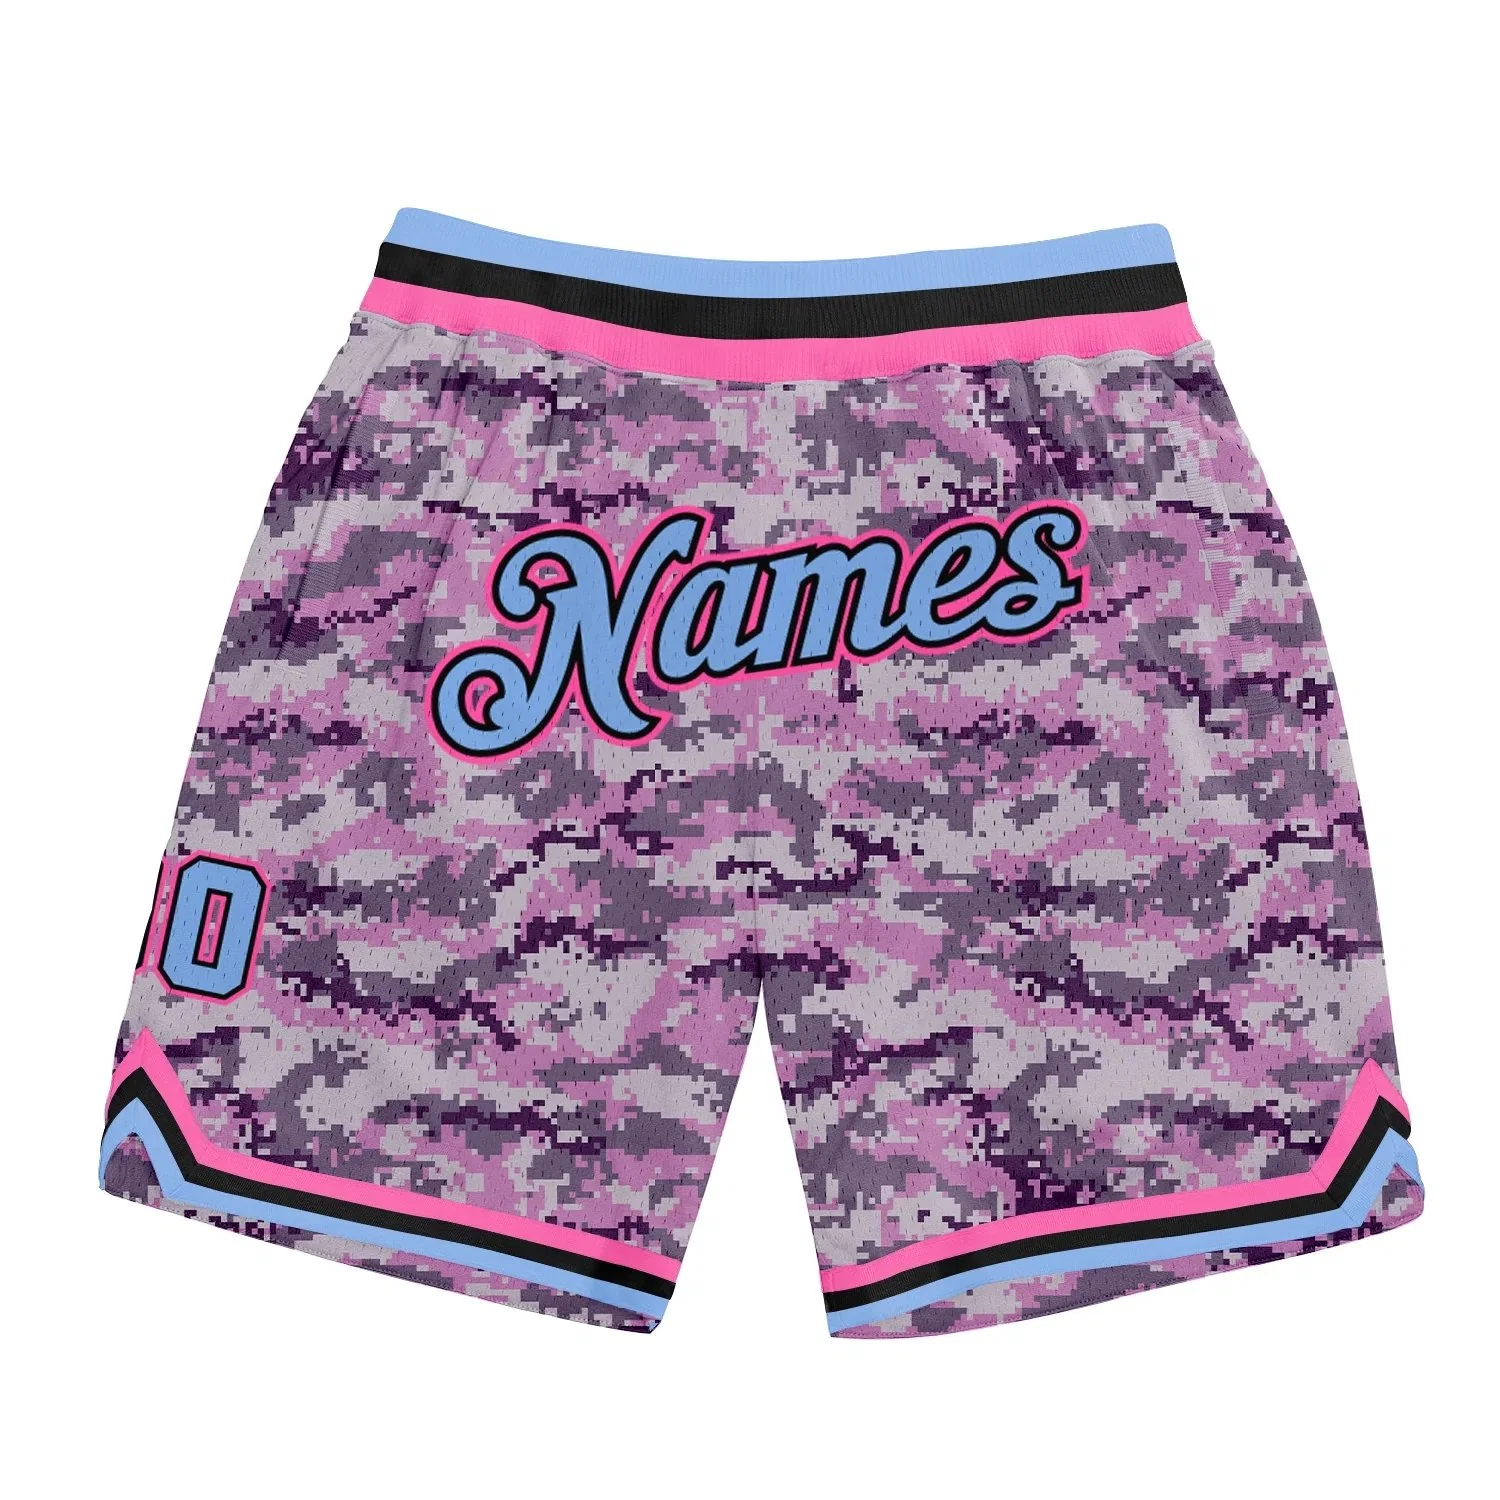 Custom Sublimation High Quality 100% Polyester Mens Short Casual Elastic Waist Printing Athletic Gym Summer Beach Shorts with Pockets